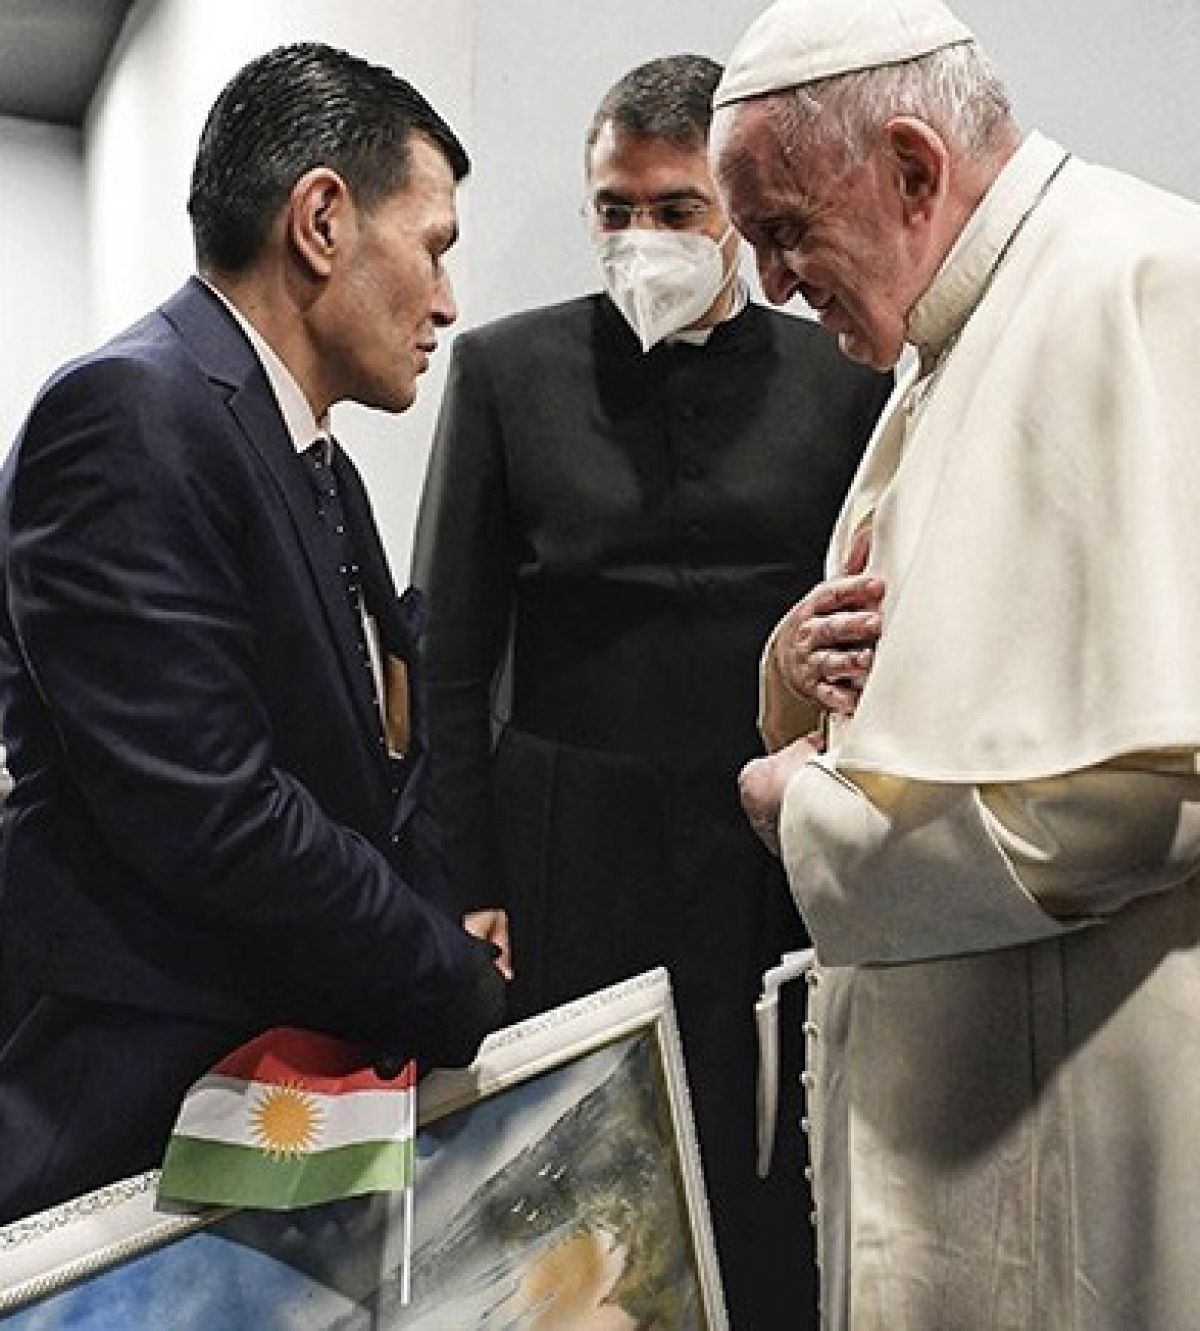 The father who gave the painting of Aylan to the Pope in Iraq: My heart cried, I kept silent #7